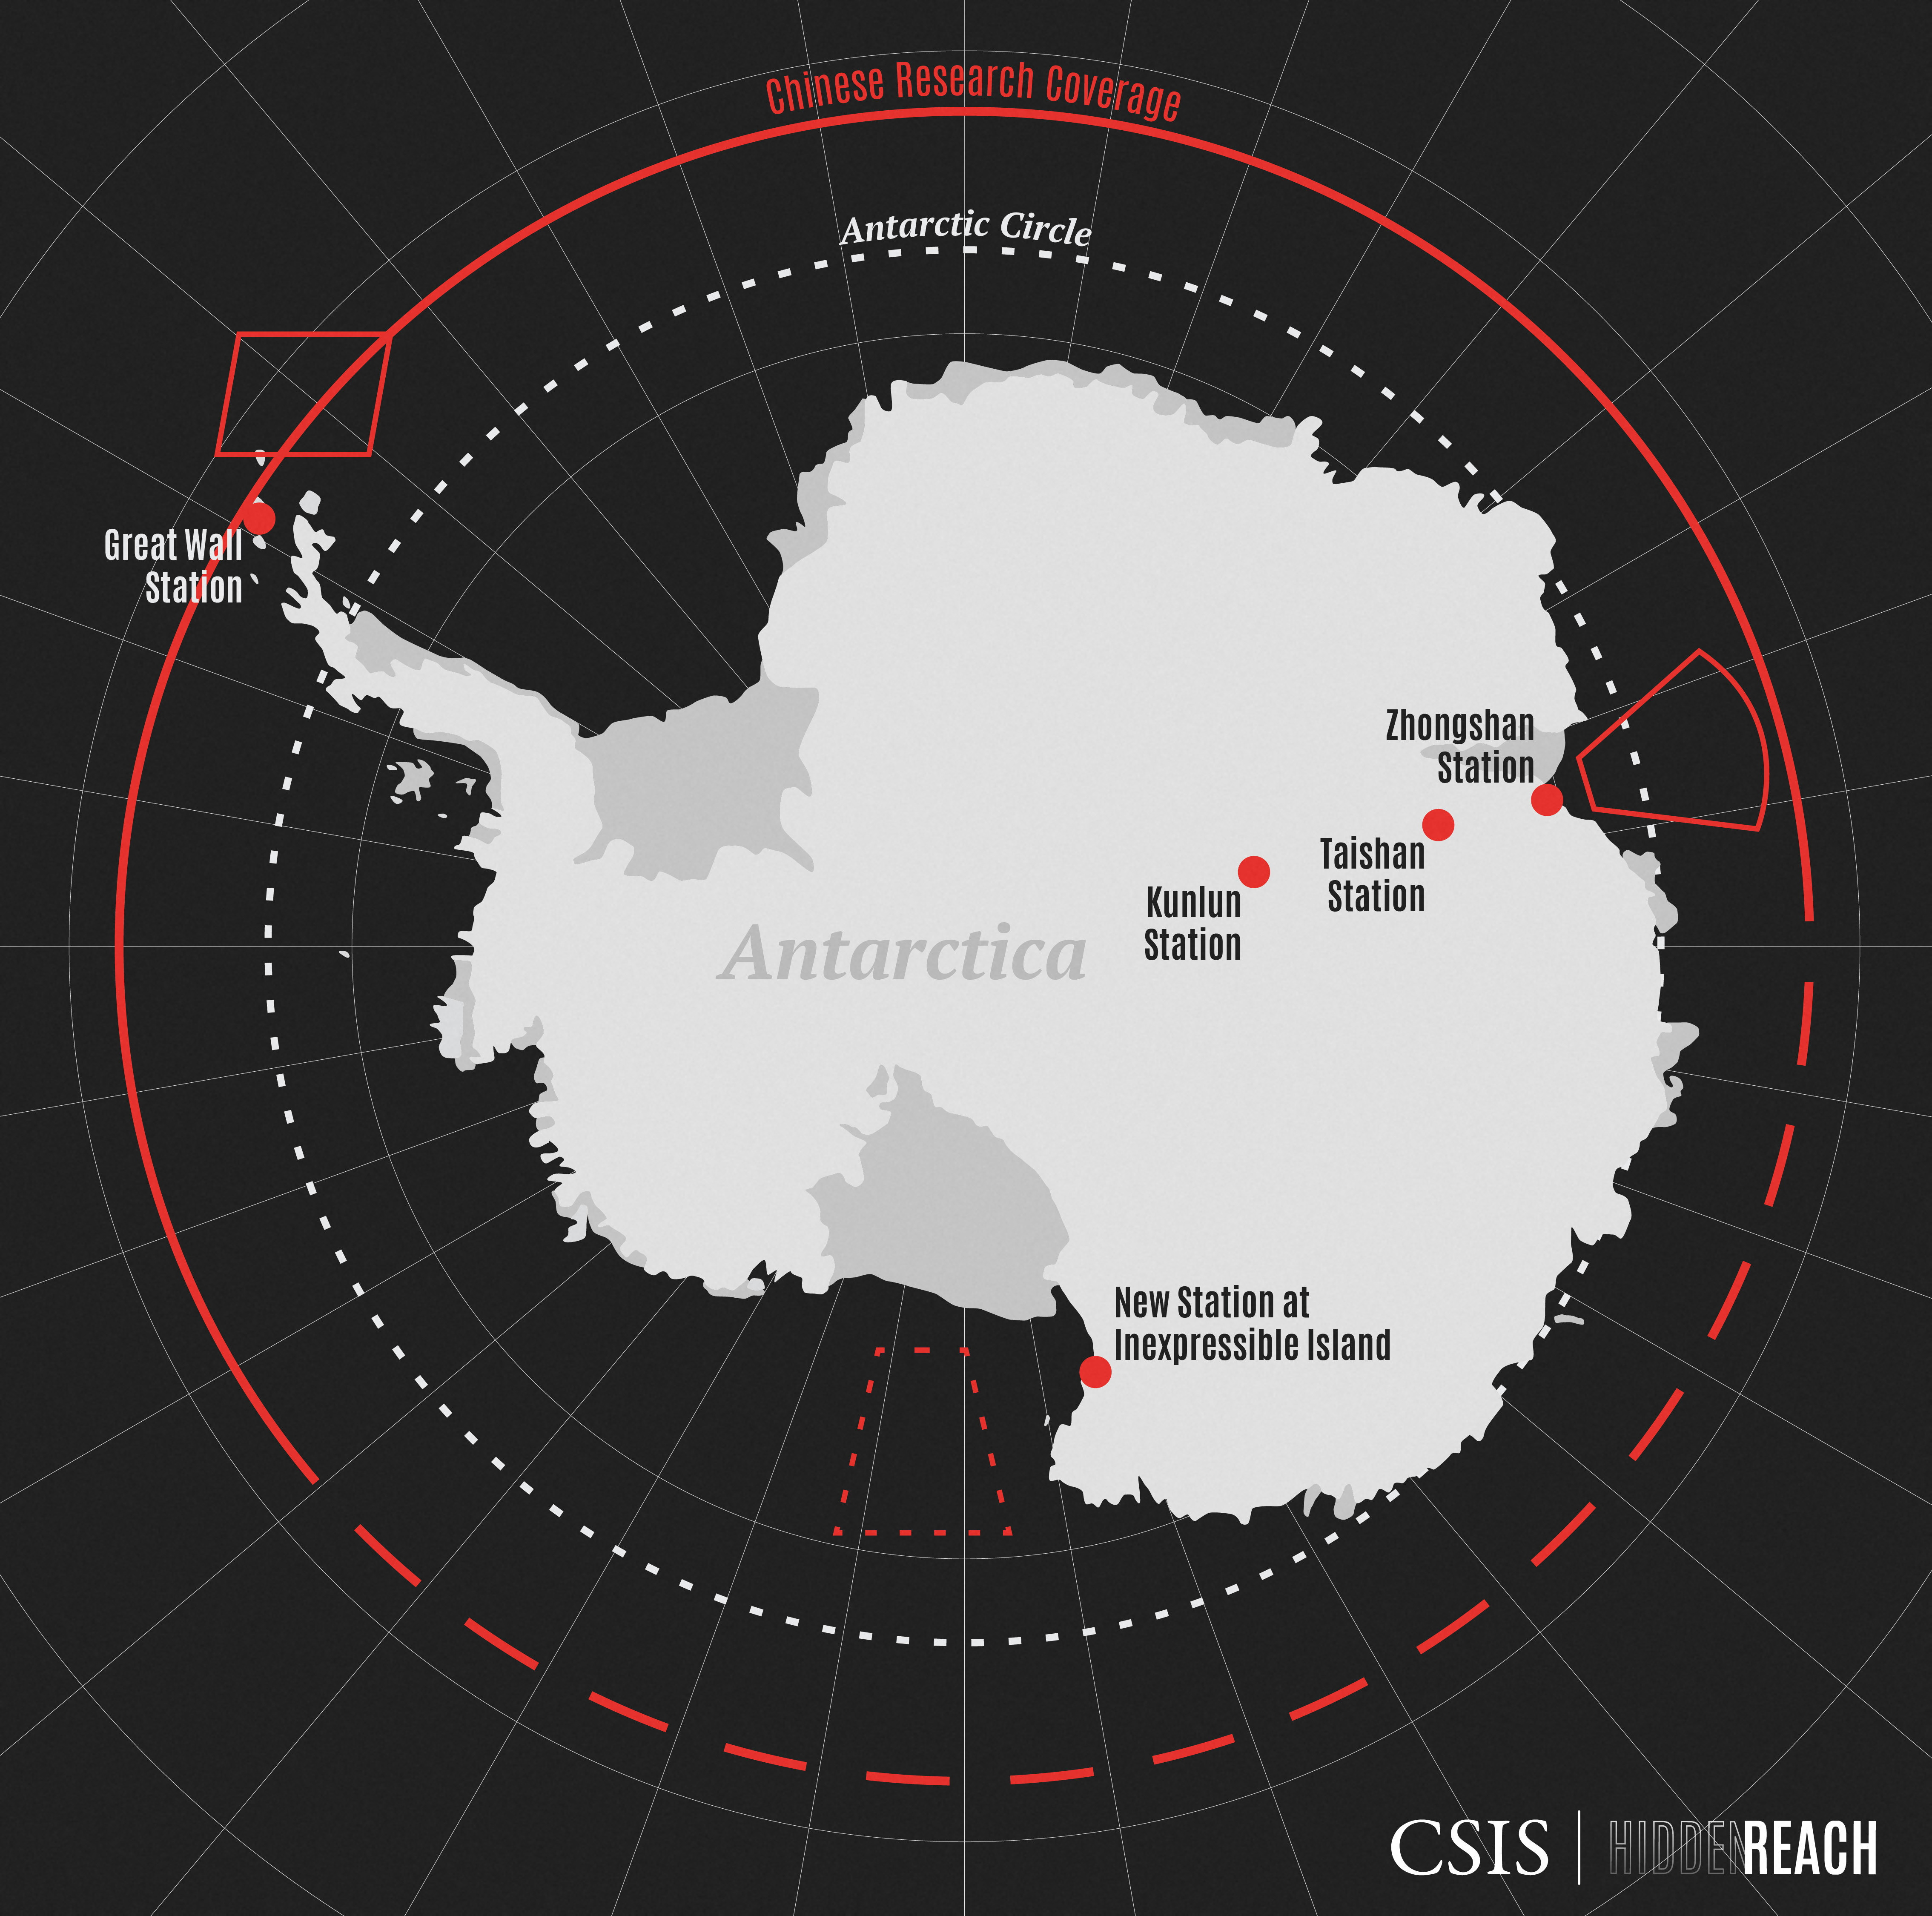 A map shows the locations of existing Chinese Antarctic stations and the Inexpressible Island site of a new station in this handout image